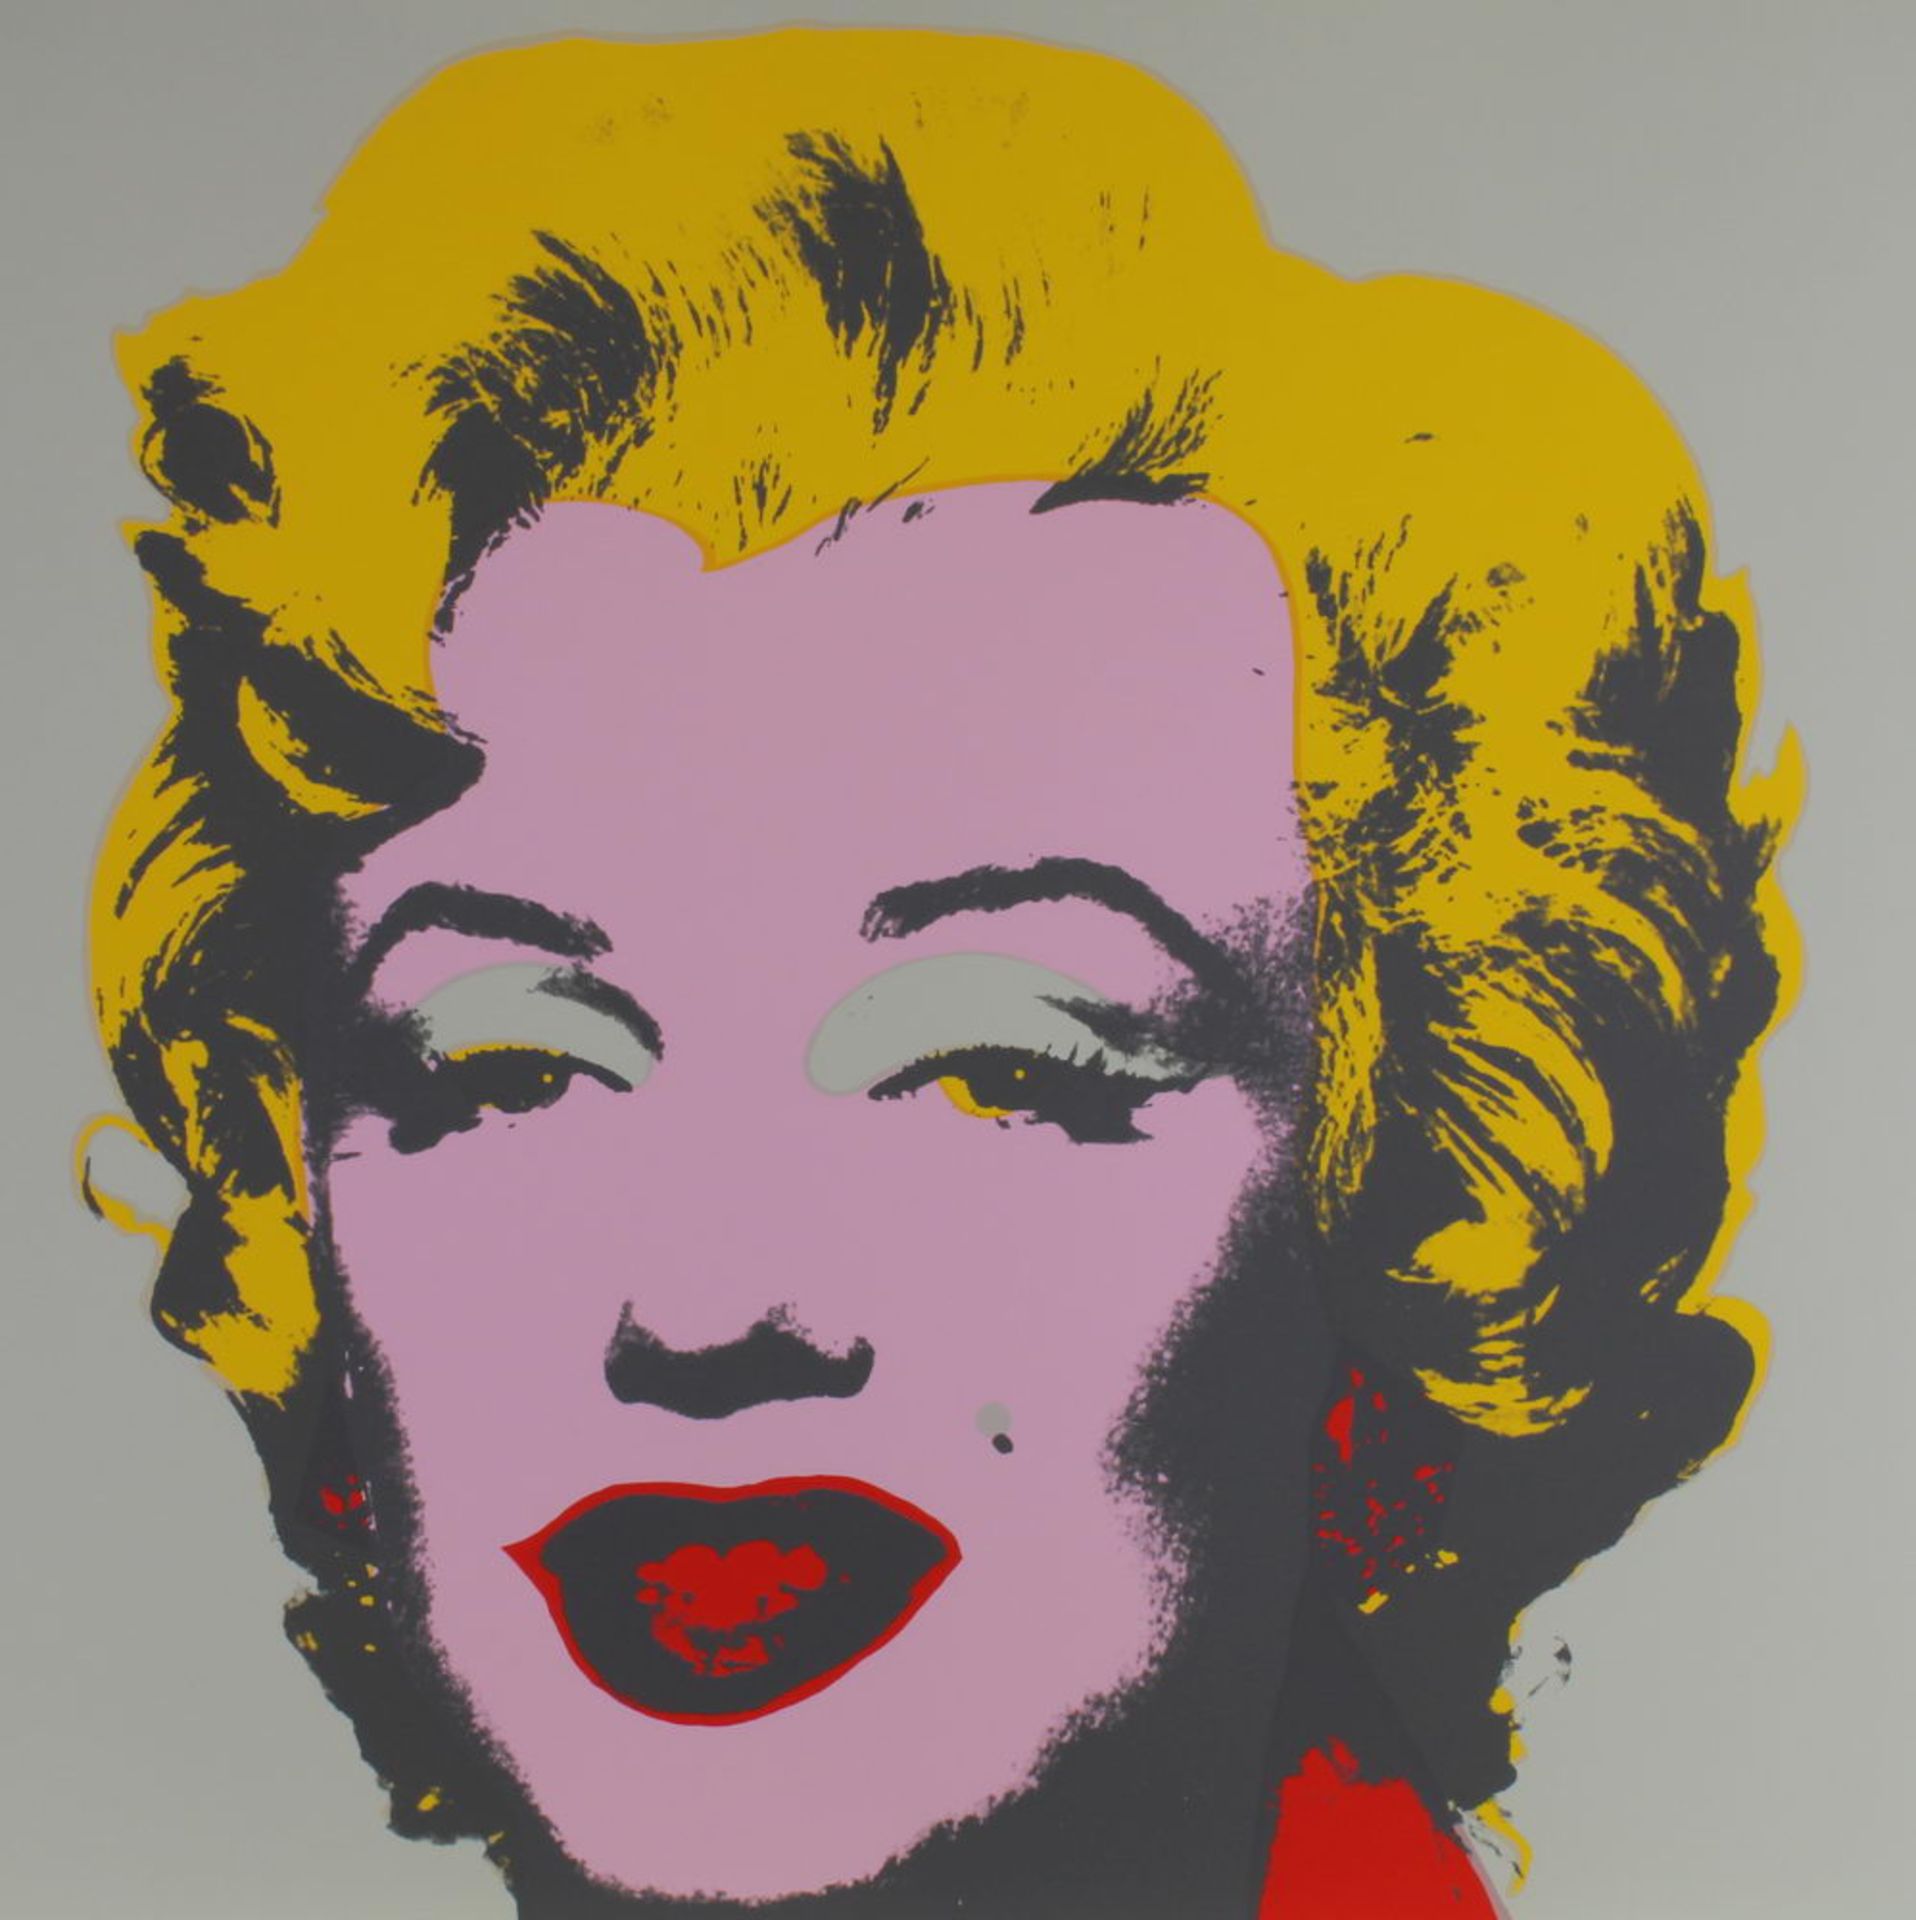 Warhol, Andy (1928 Pittsburgh - 1987 New York), 10 Farbserigrafien, "Marilyn Monroe", published by